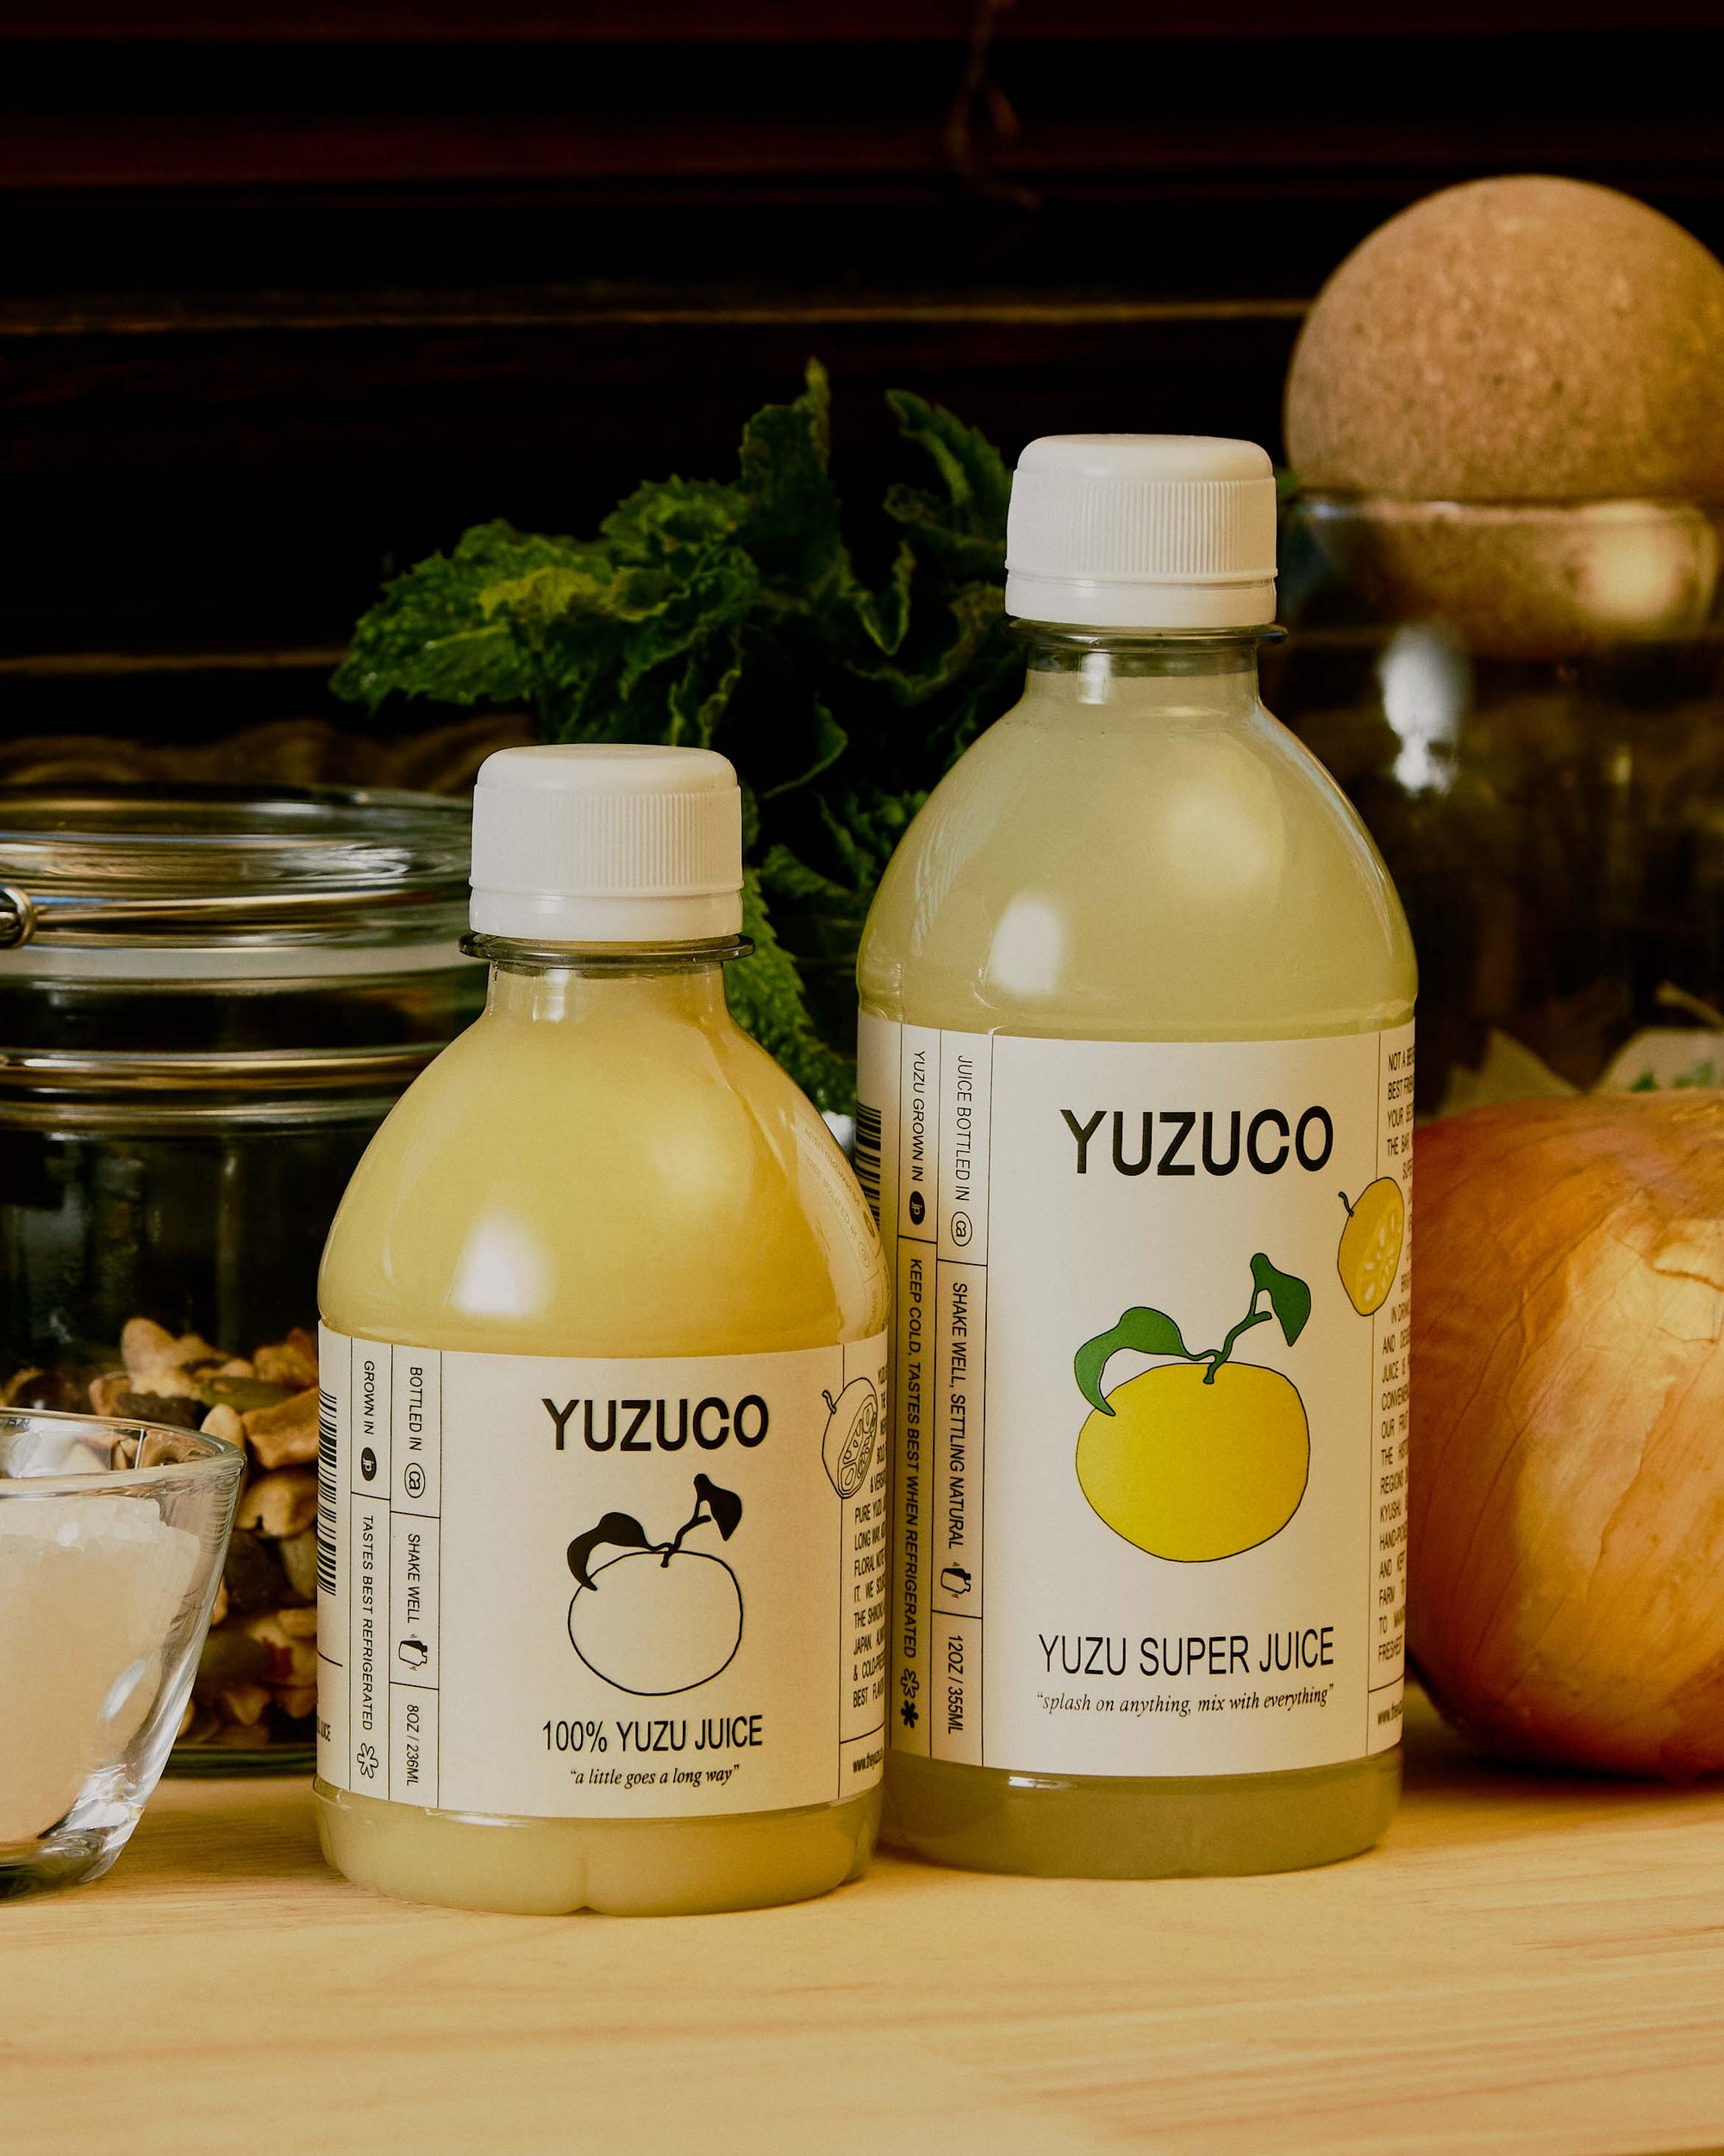 bottles of yuzuco yuzu juice next to other pantry items and produce